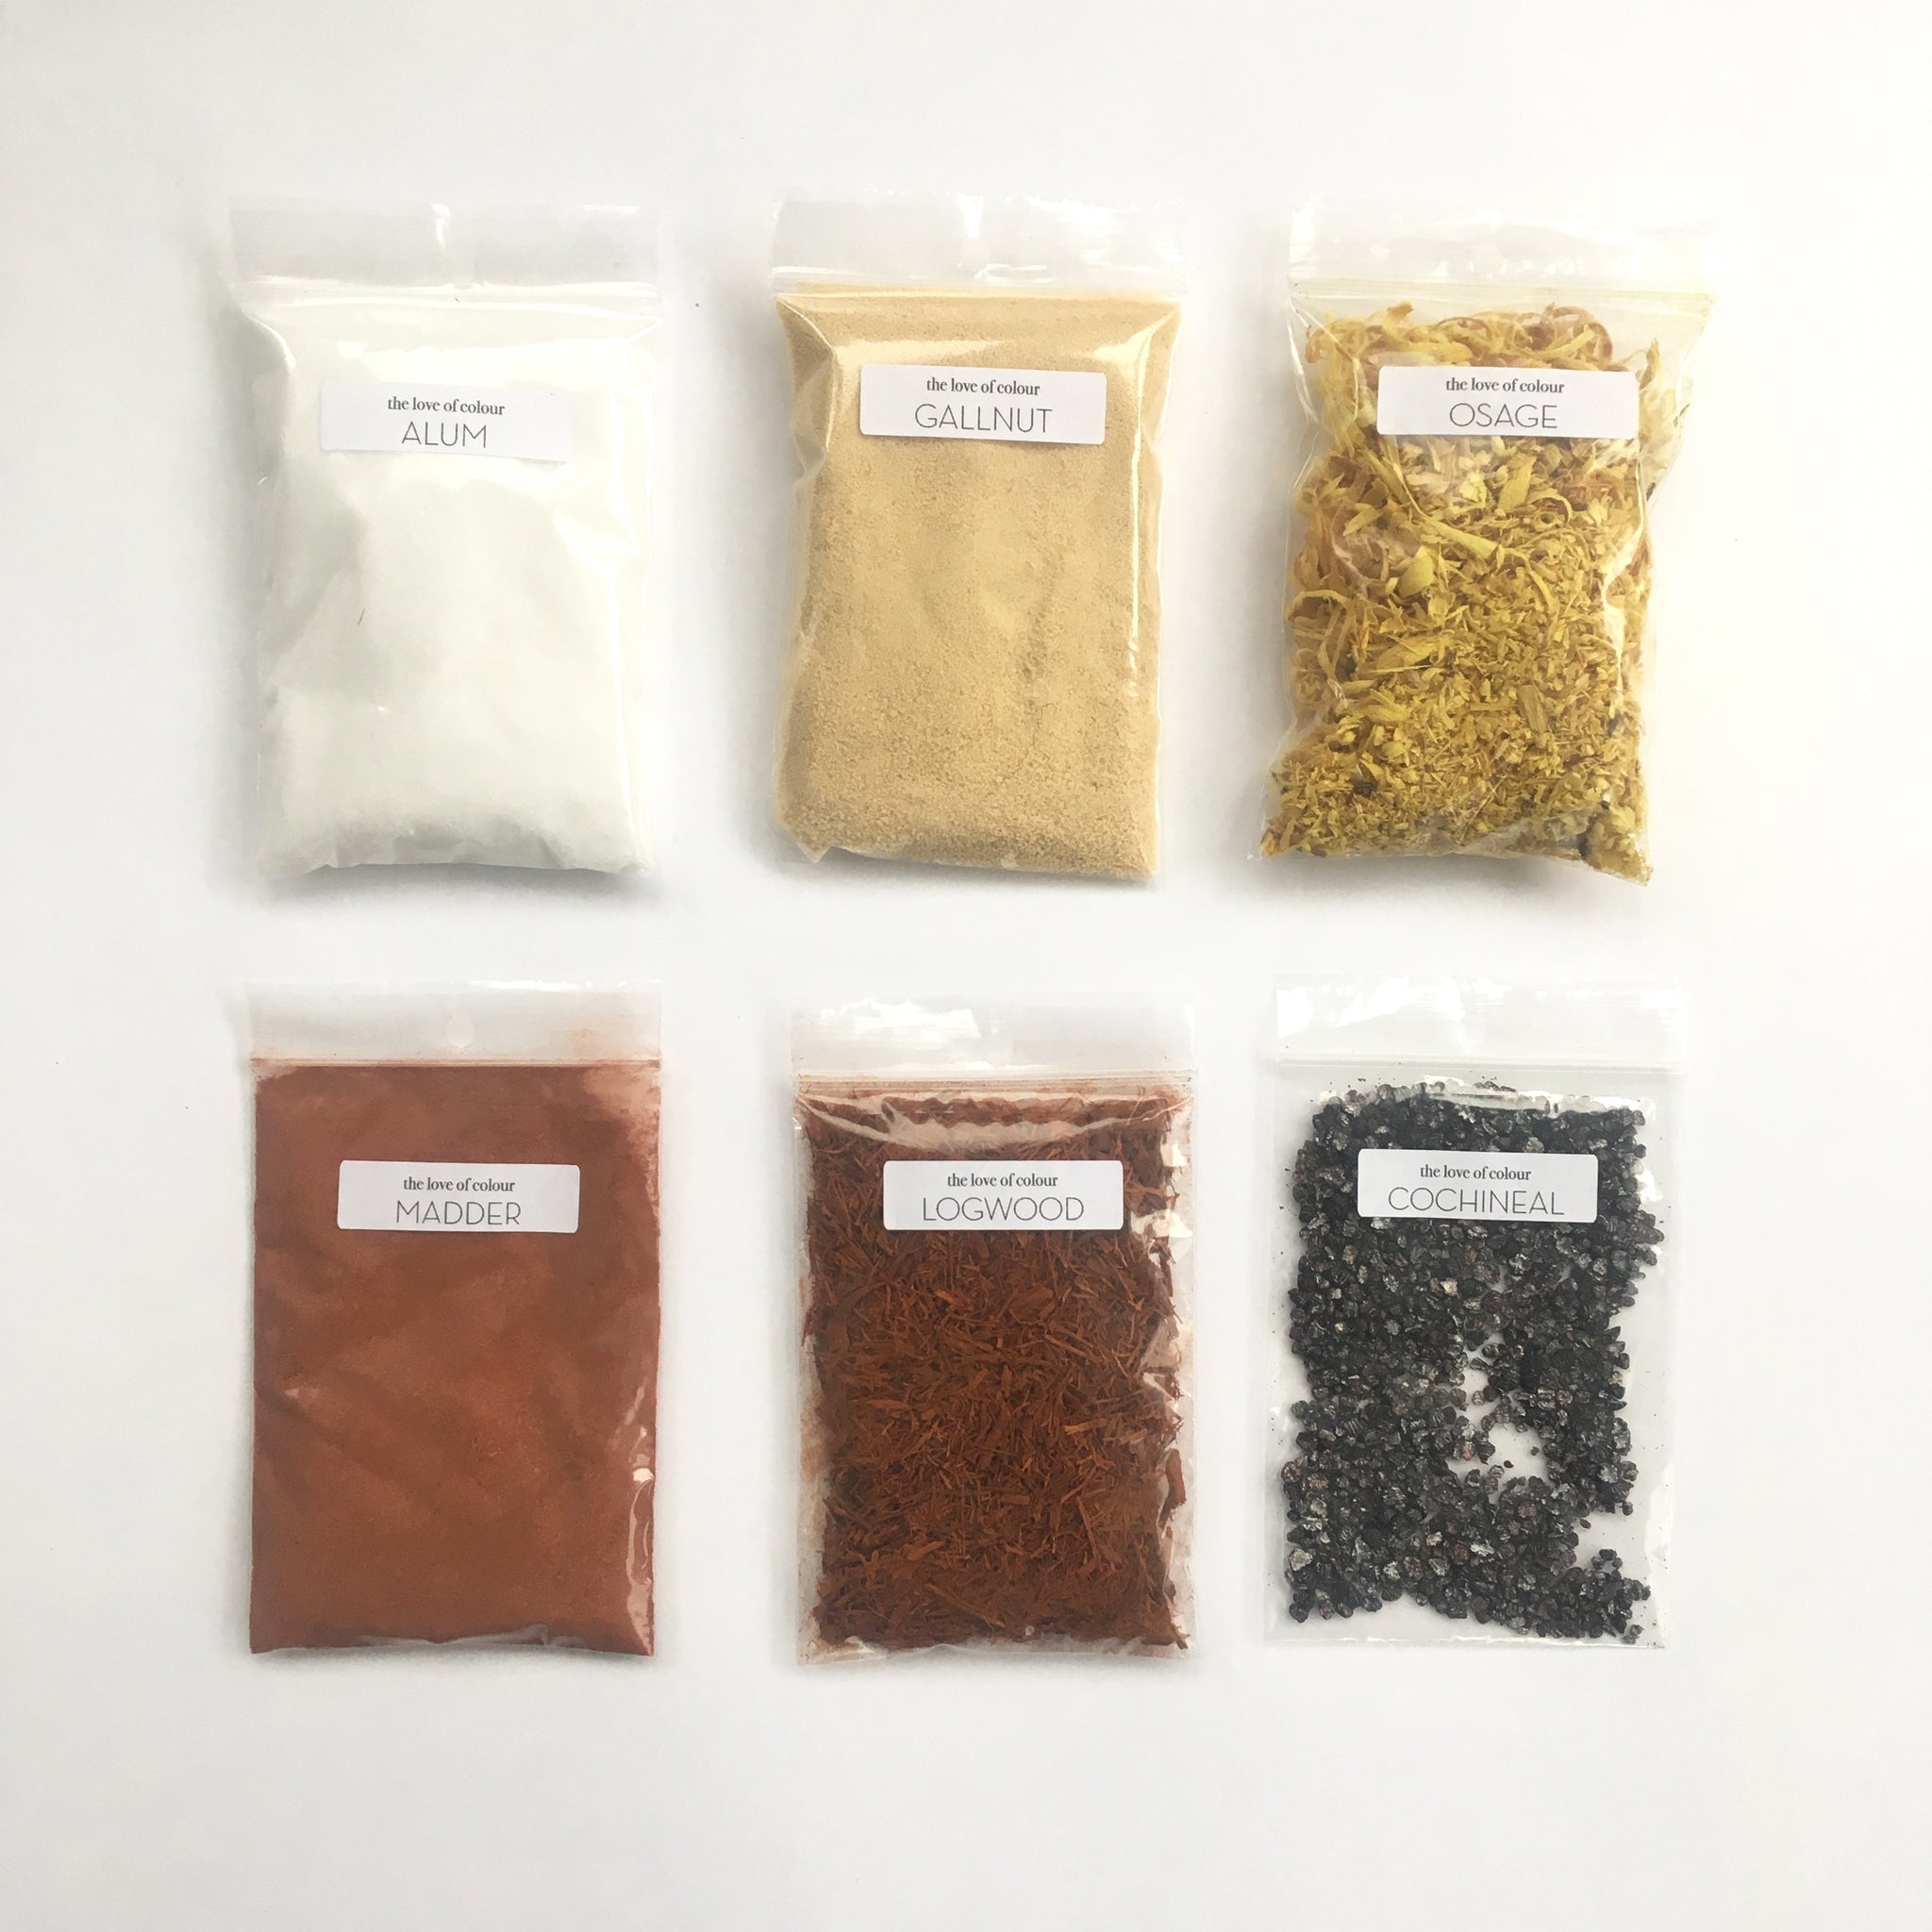 Contents of natural dye kit